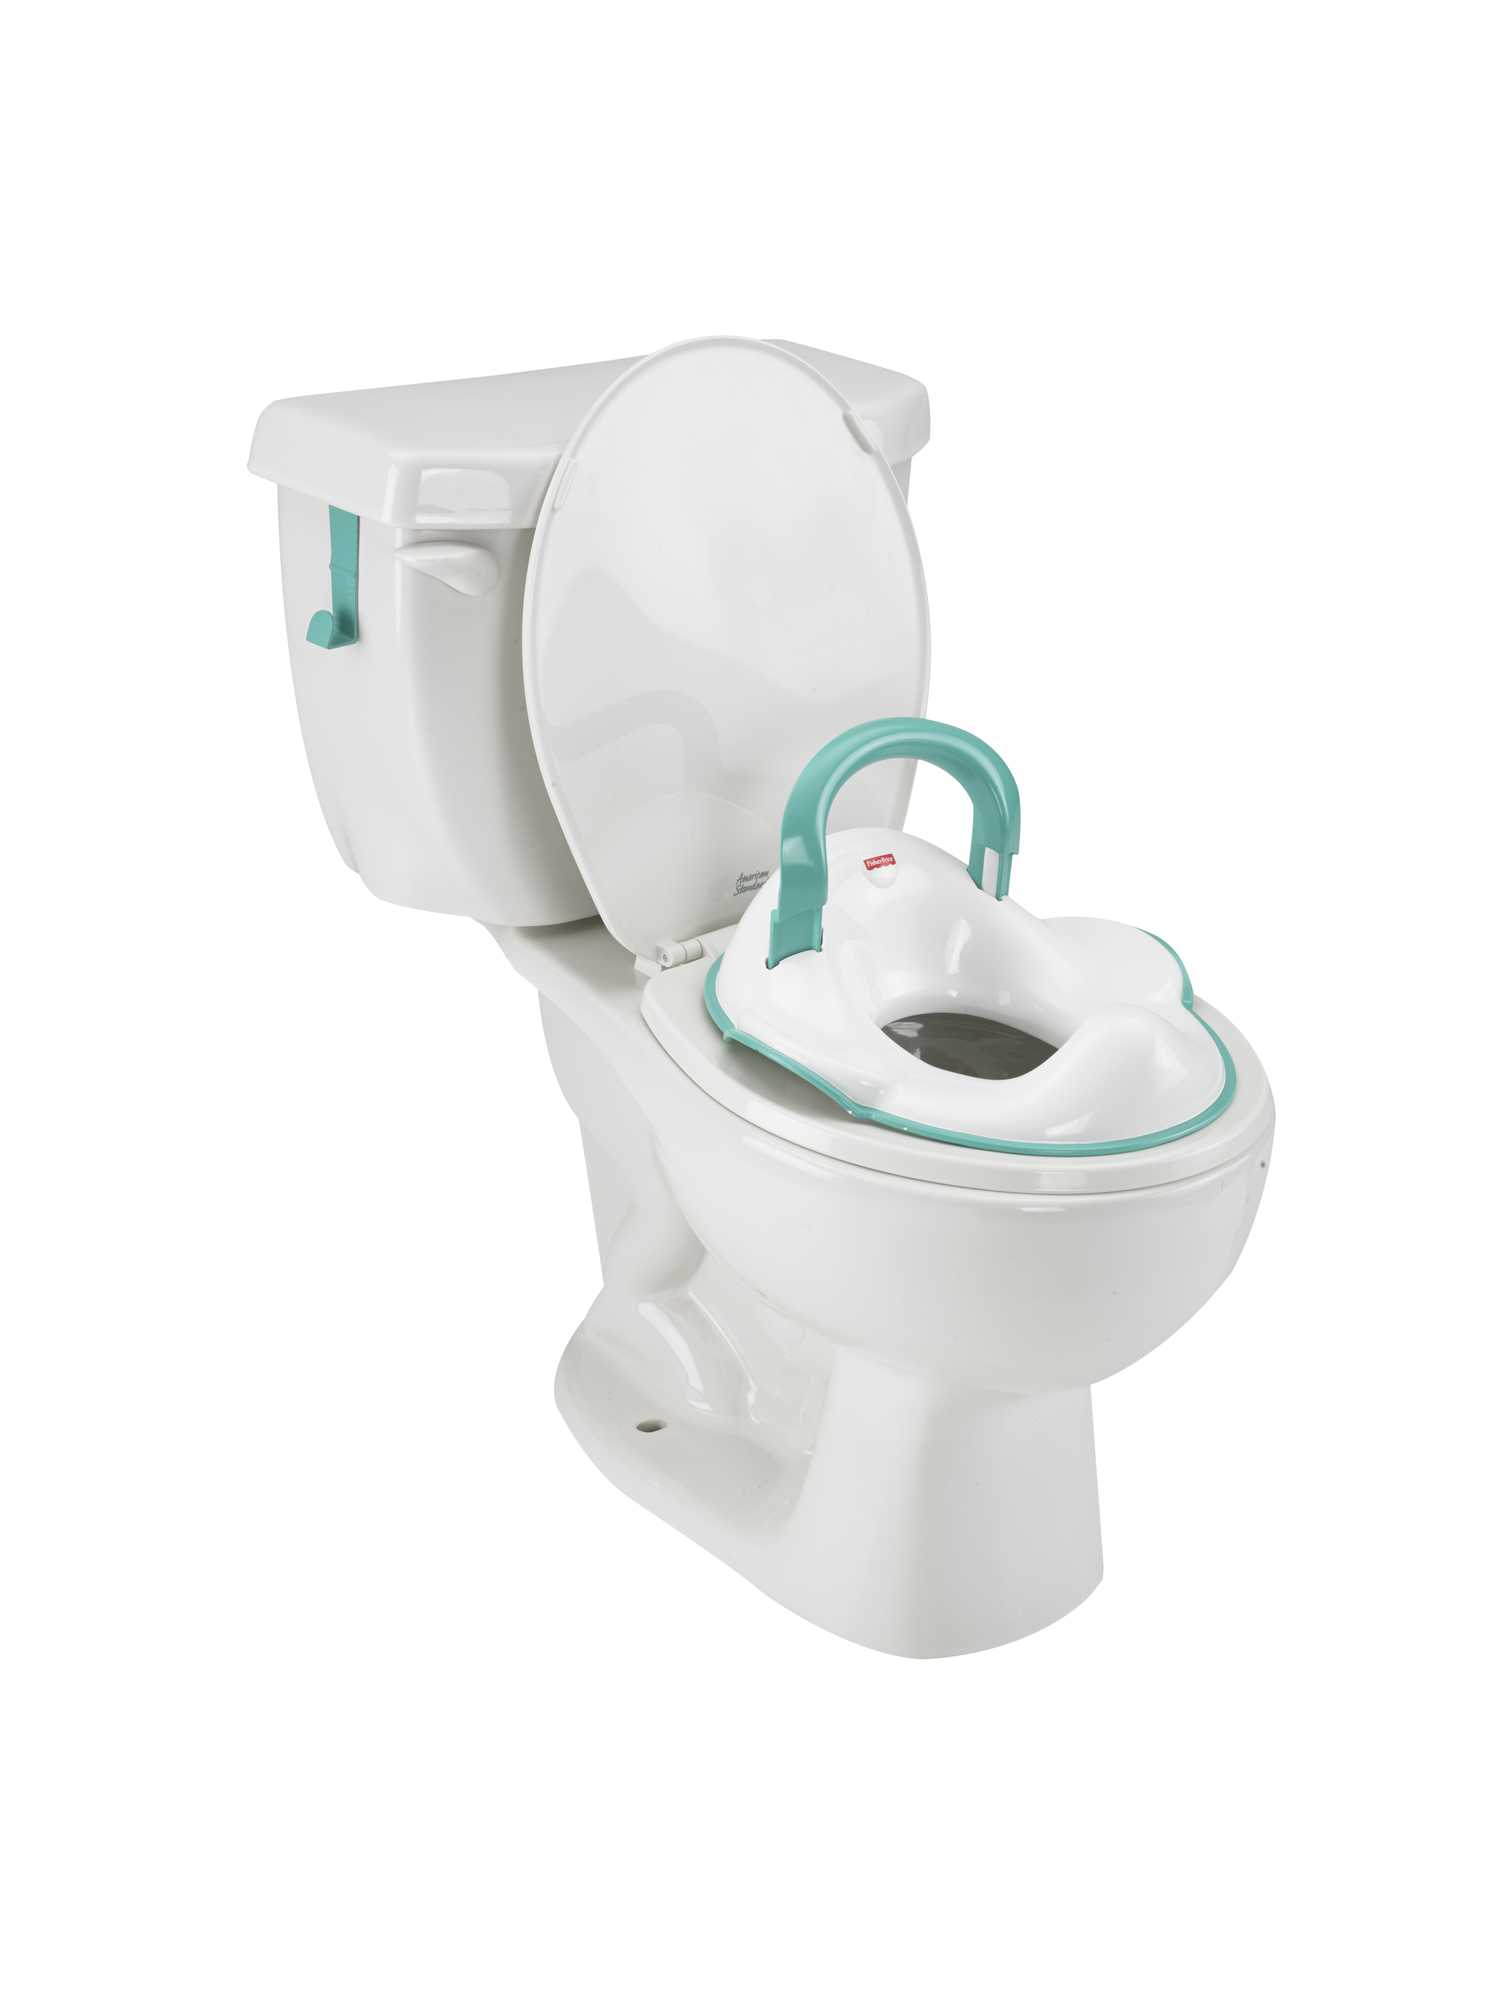 Fisher-Price Perfect Fit Adjustable Potty Training Seat - image 3 of 6